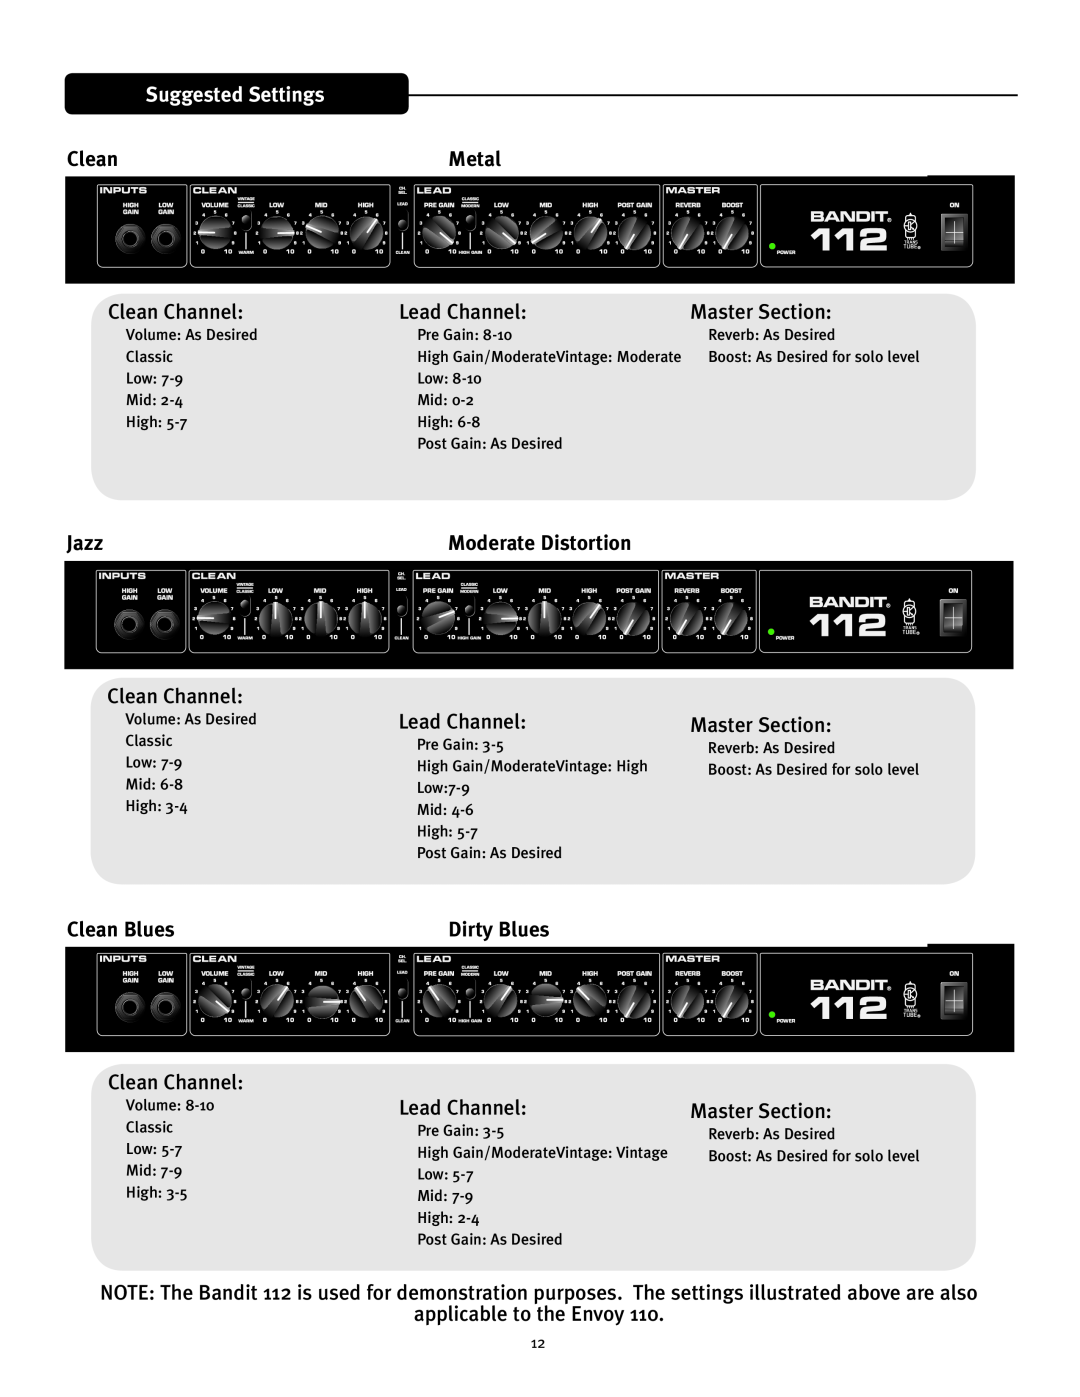 Peavey 110 Suggested Settings, Metal, Clean Channel, Lead Channel, Jazz, Clean Blues, Master Section, Dirty Blues 